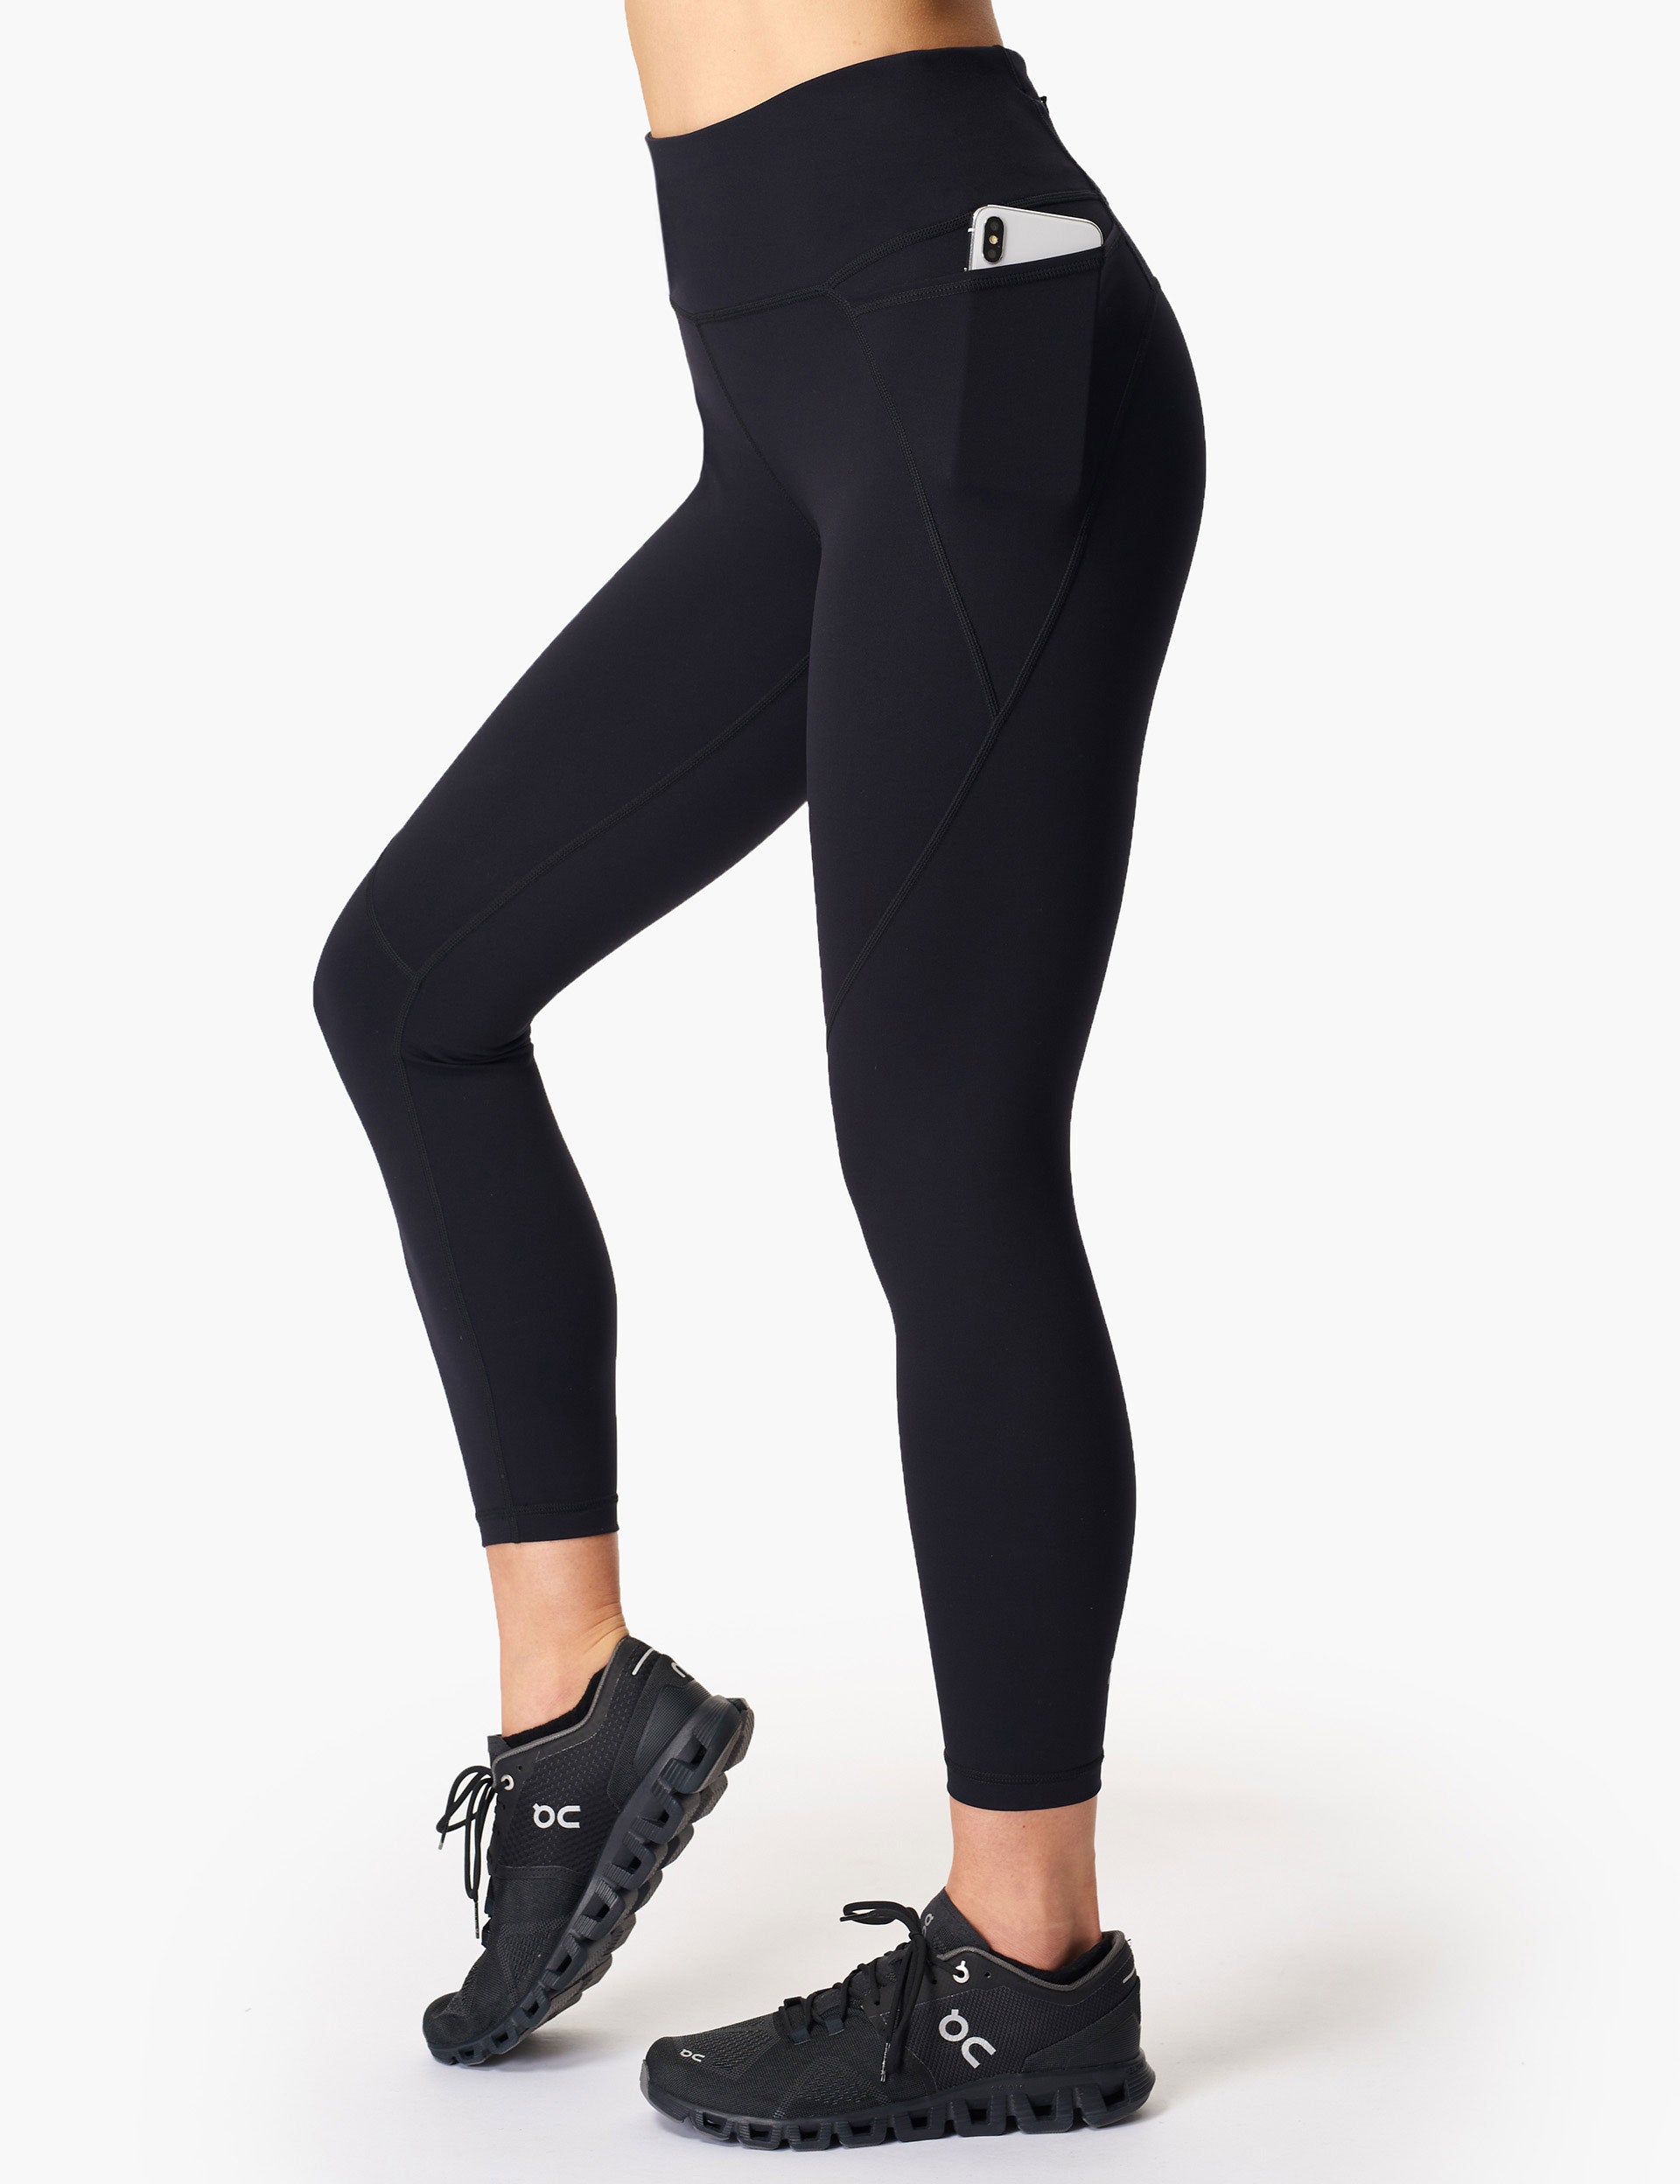 Buy Sunzel Workout Leggings for Women, Squat Proof High Waisted Yoga Pants  4 Way Stretch, Buttery Soft Black at Amazon.in